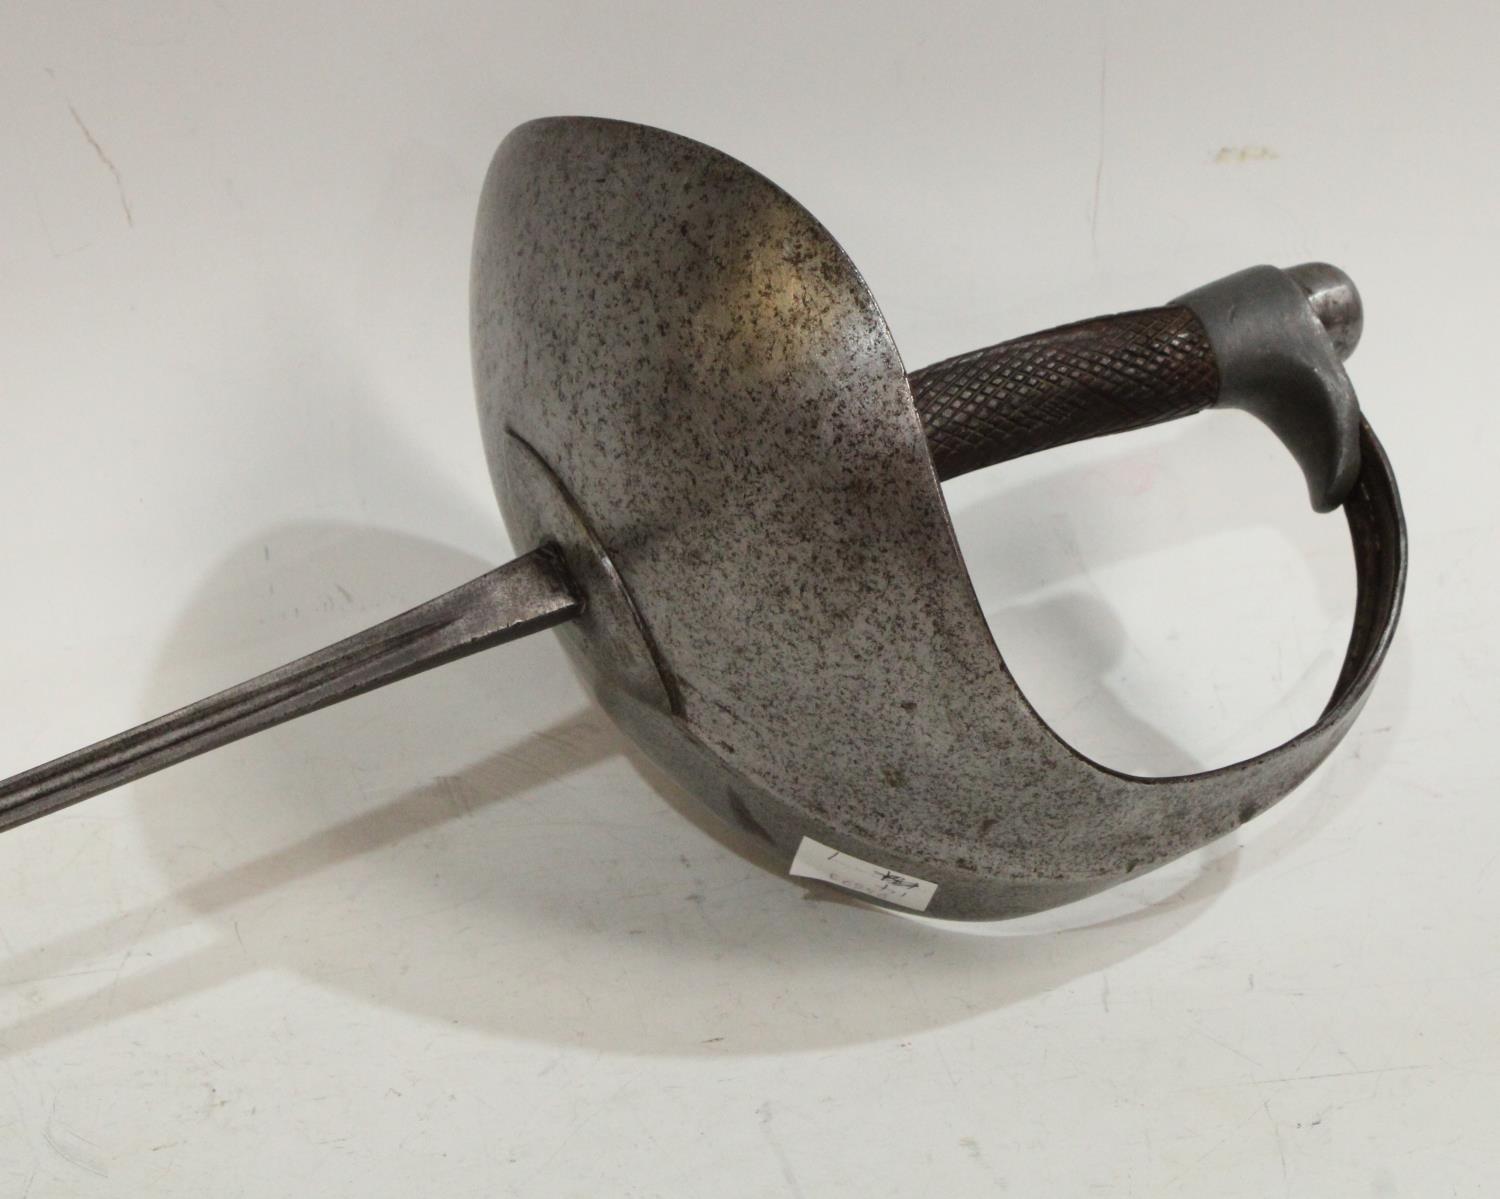 A 19th century rapier or epee, bowl guard, - Image 2 of 3